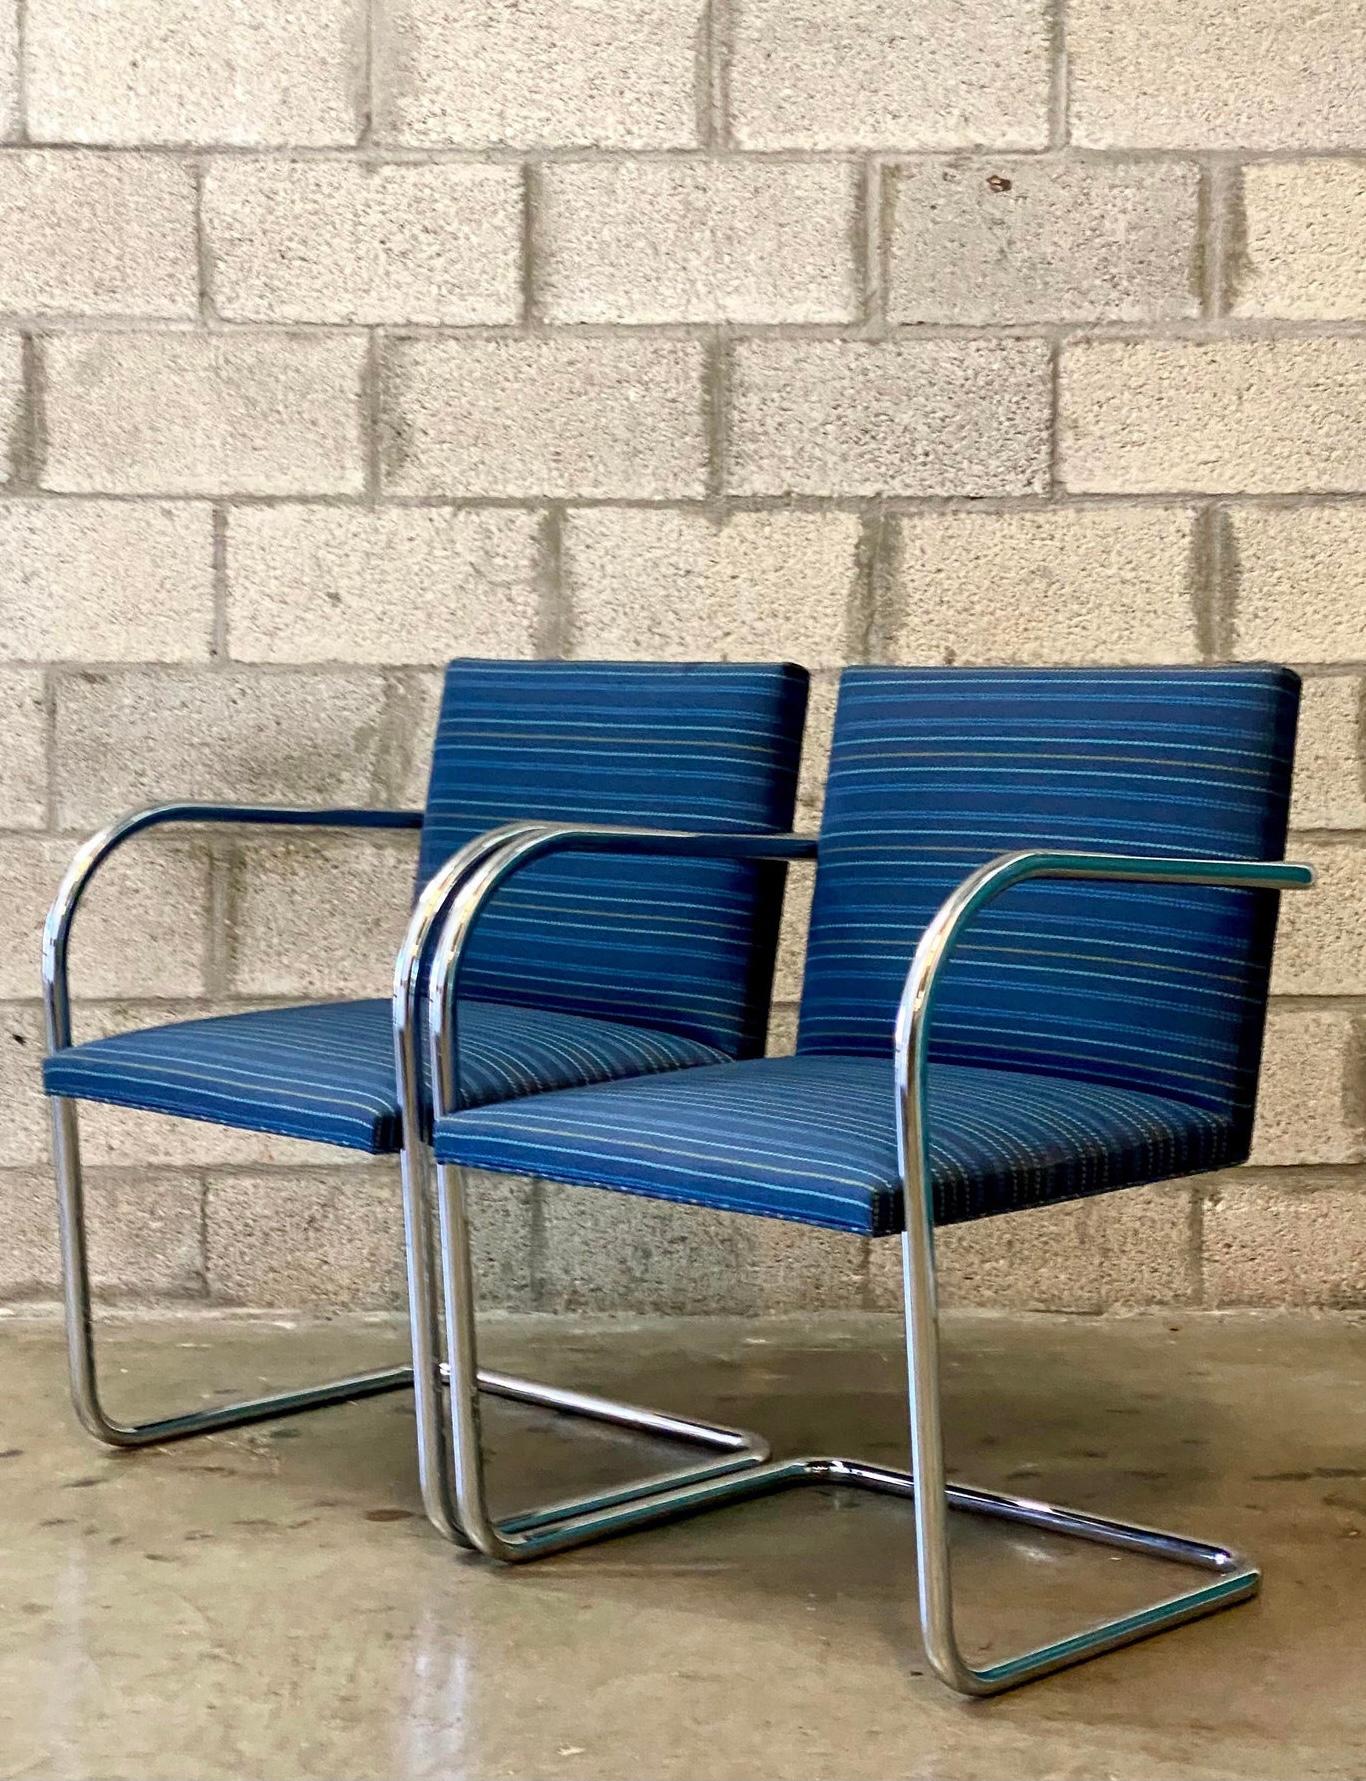 Iconic pair of MCM Knoll chairs. The tubular version of the coveted BRNO design. A cantilevered profile with brilliant blue broken stripe upholstery.